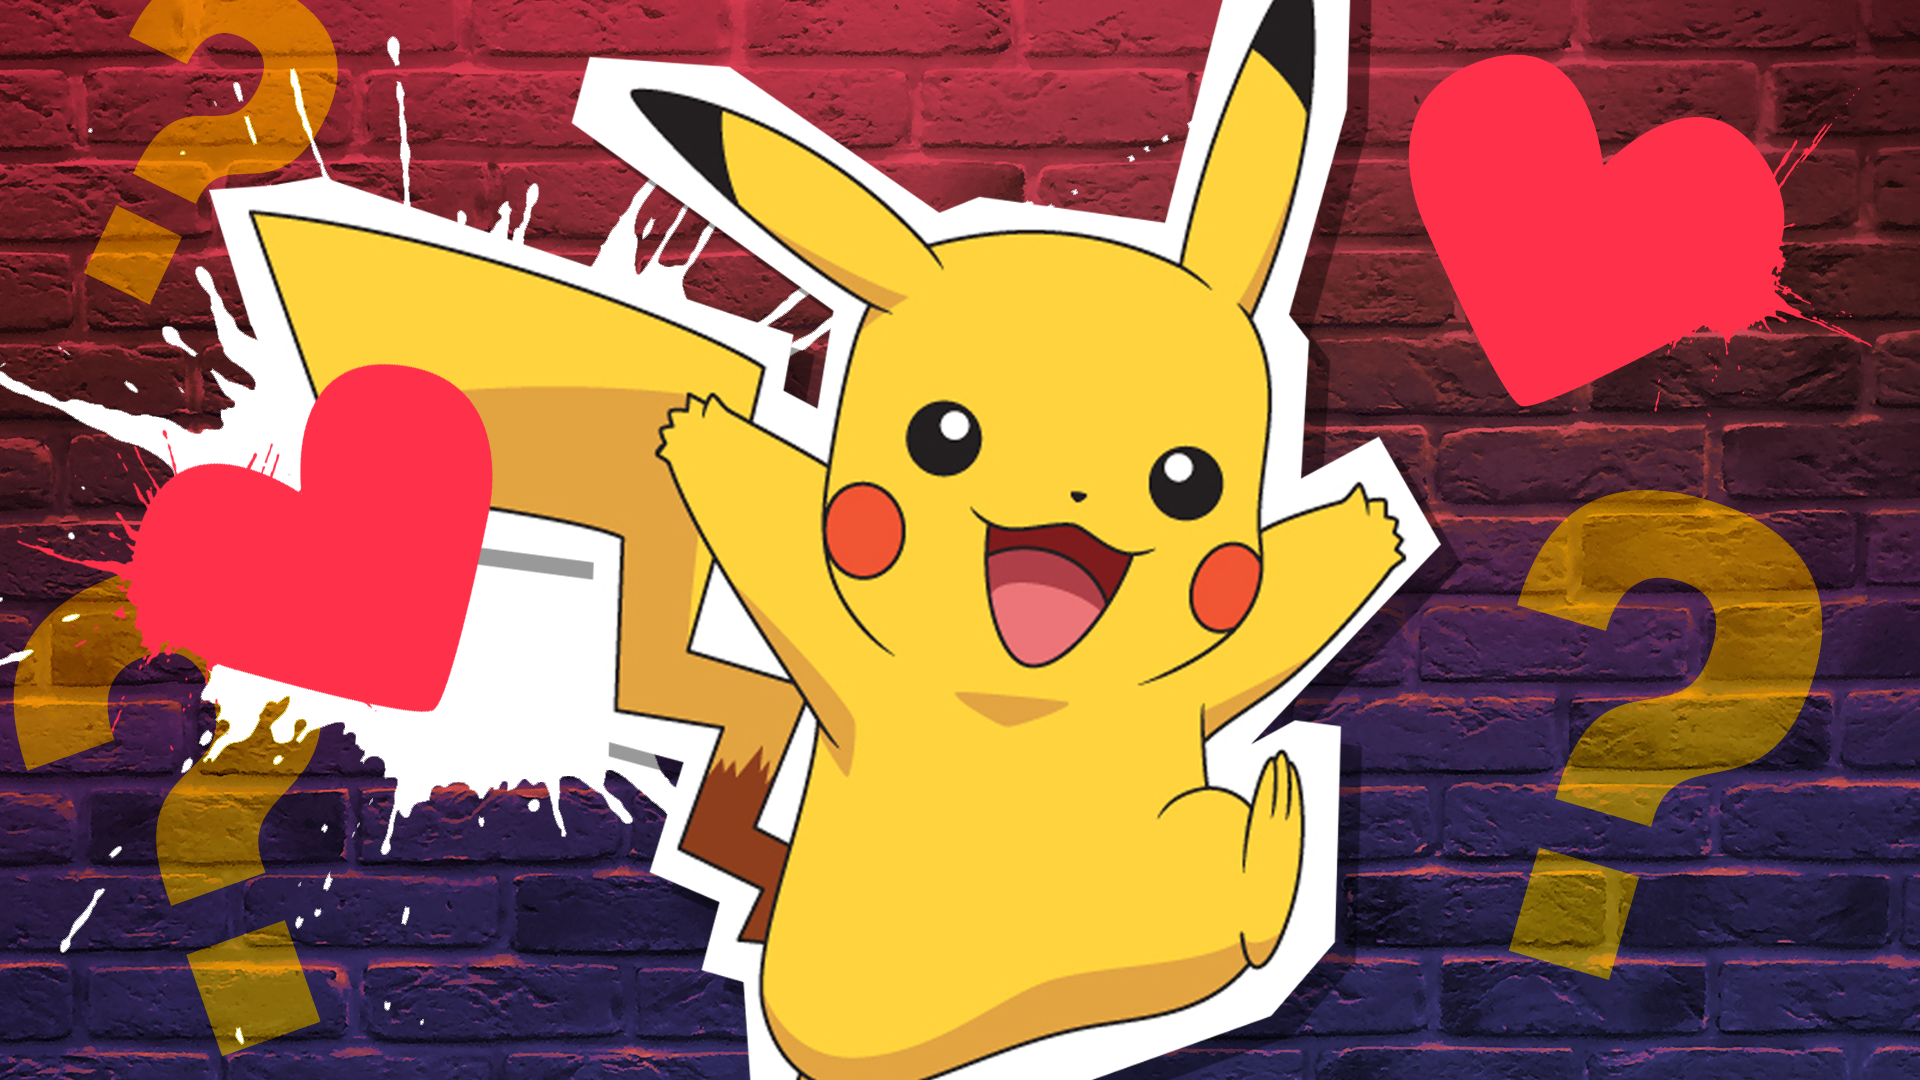 Pikachu surrounded by hearts and question marks